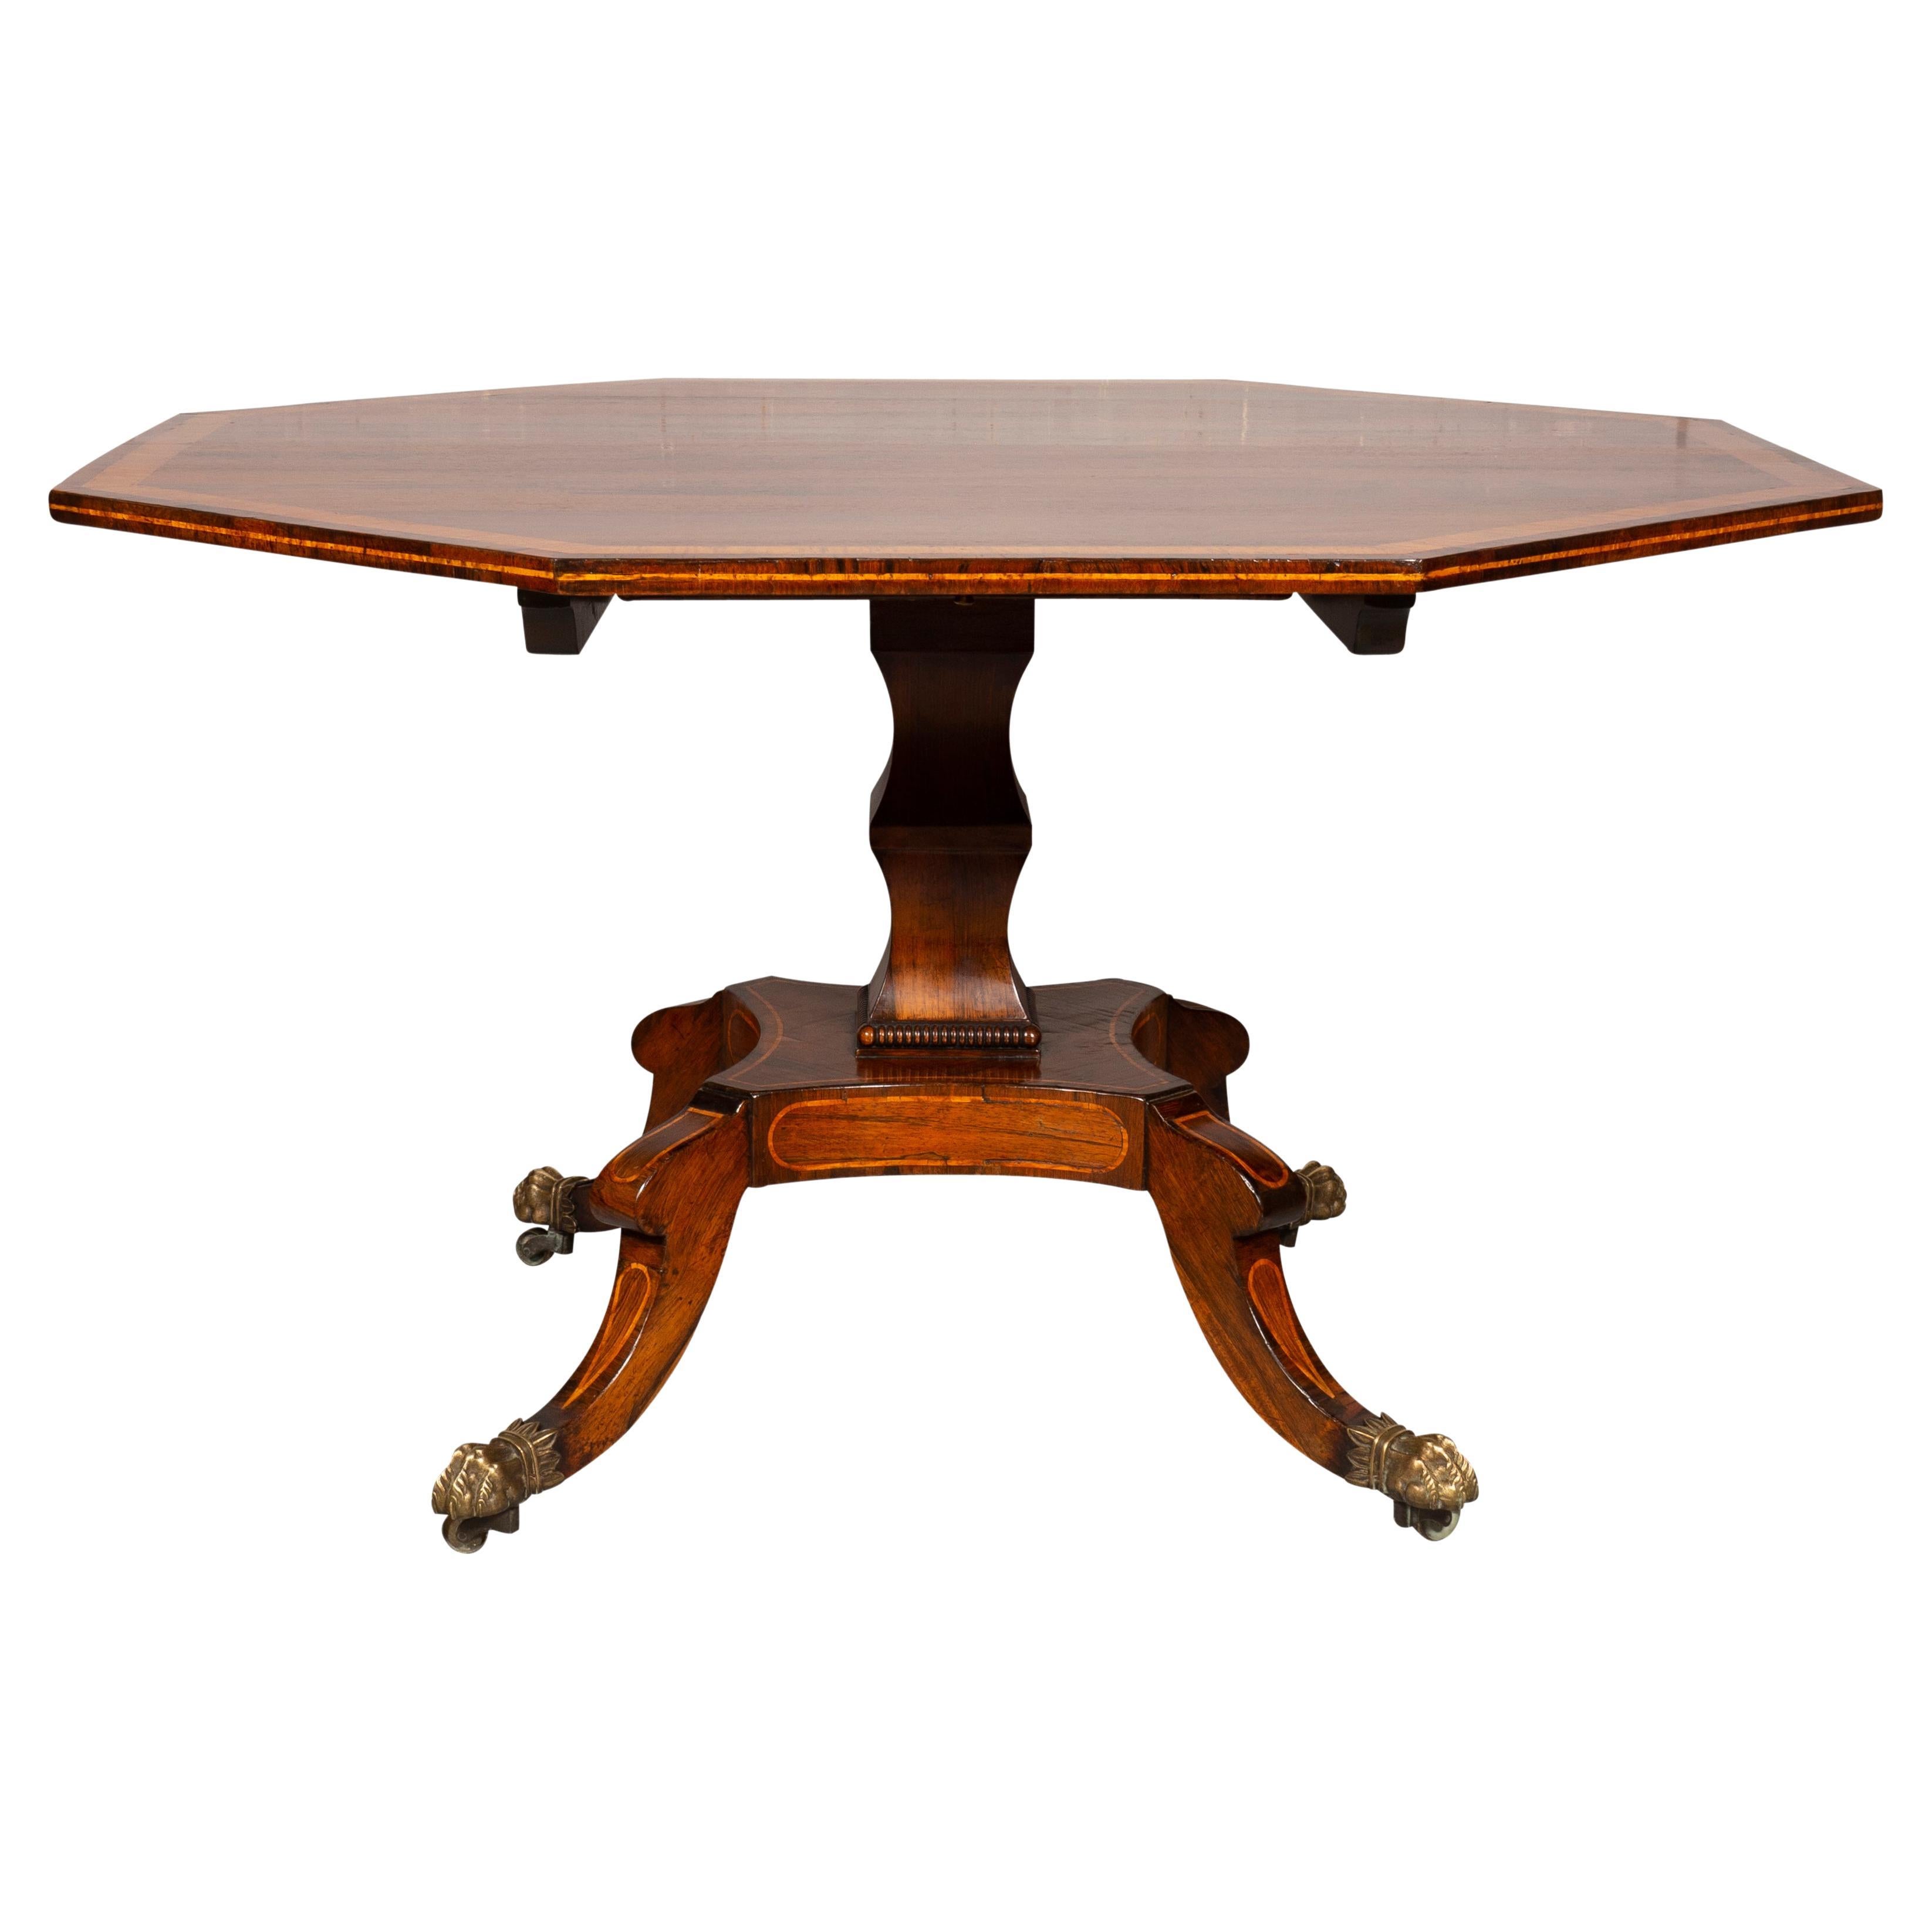 Octagonal top with satinwood banding , hinged to tilt , raised on a shaped support joining a platform with four saber legs with stringing inlay and paneled inlays and lions paw brass feet and casters. Provenance ; Beverly Hills Collection.